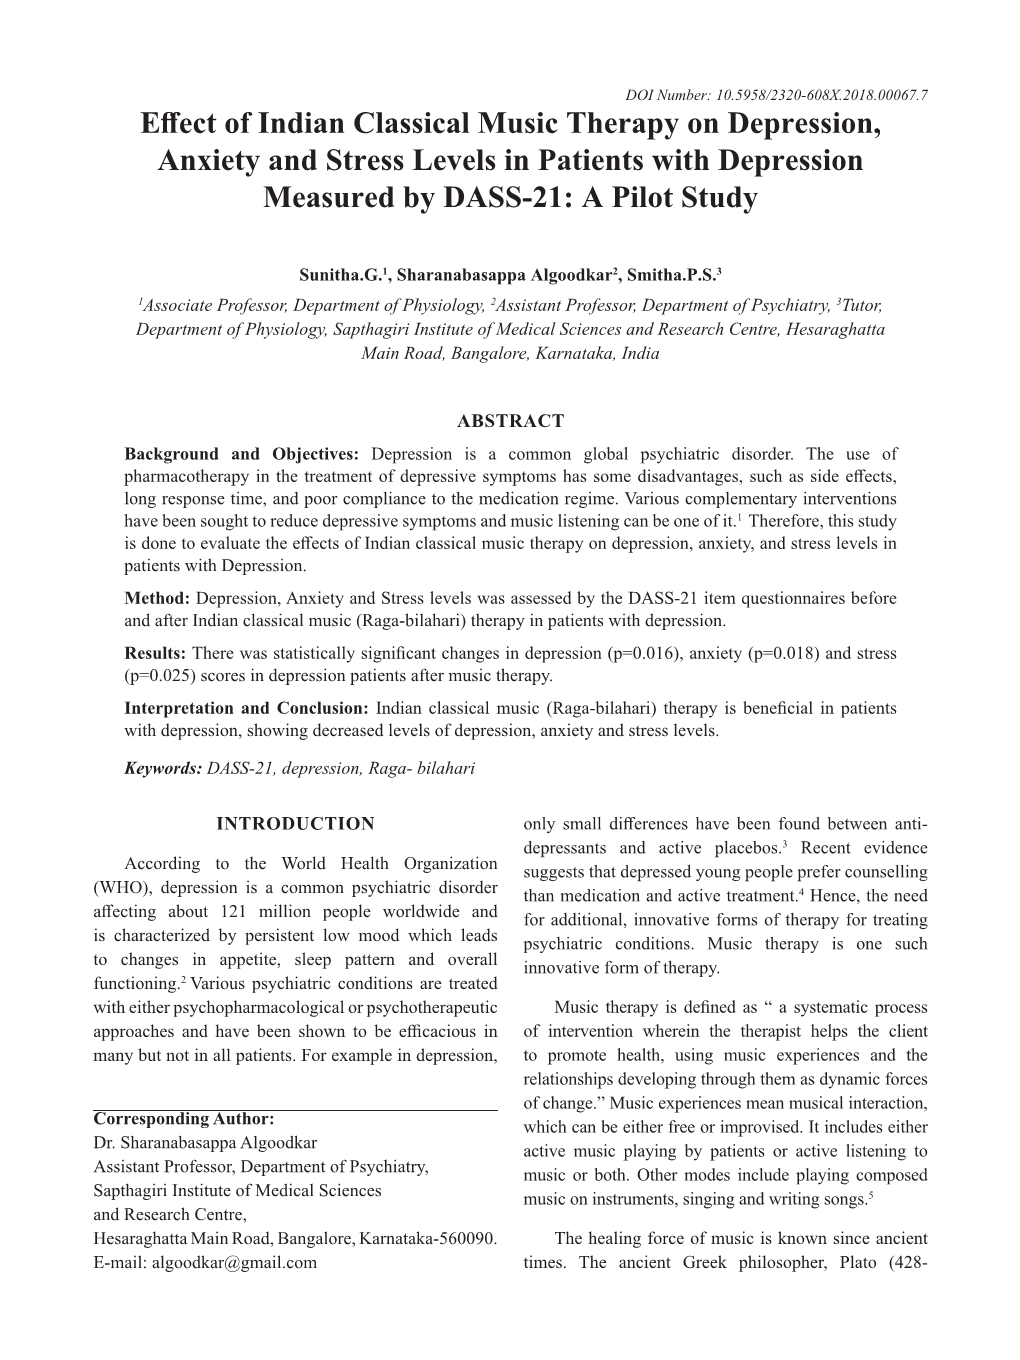 Effect of Indian Classical Music Therapy on Depression, Anxiety and Stress Levels in Patients with Depression Measured by DASS-21: a Pilot Study